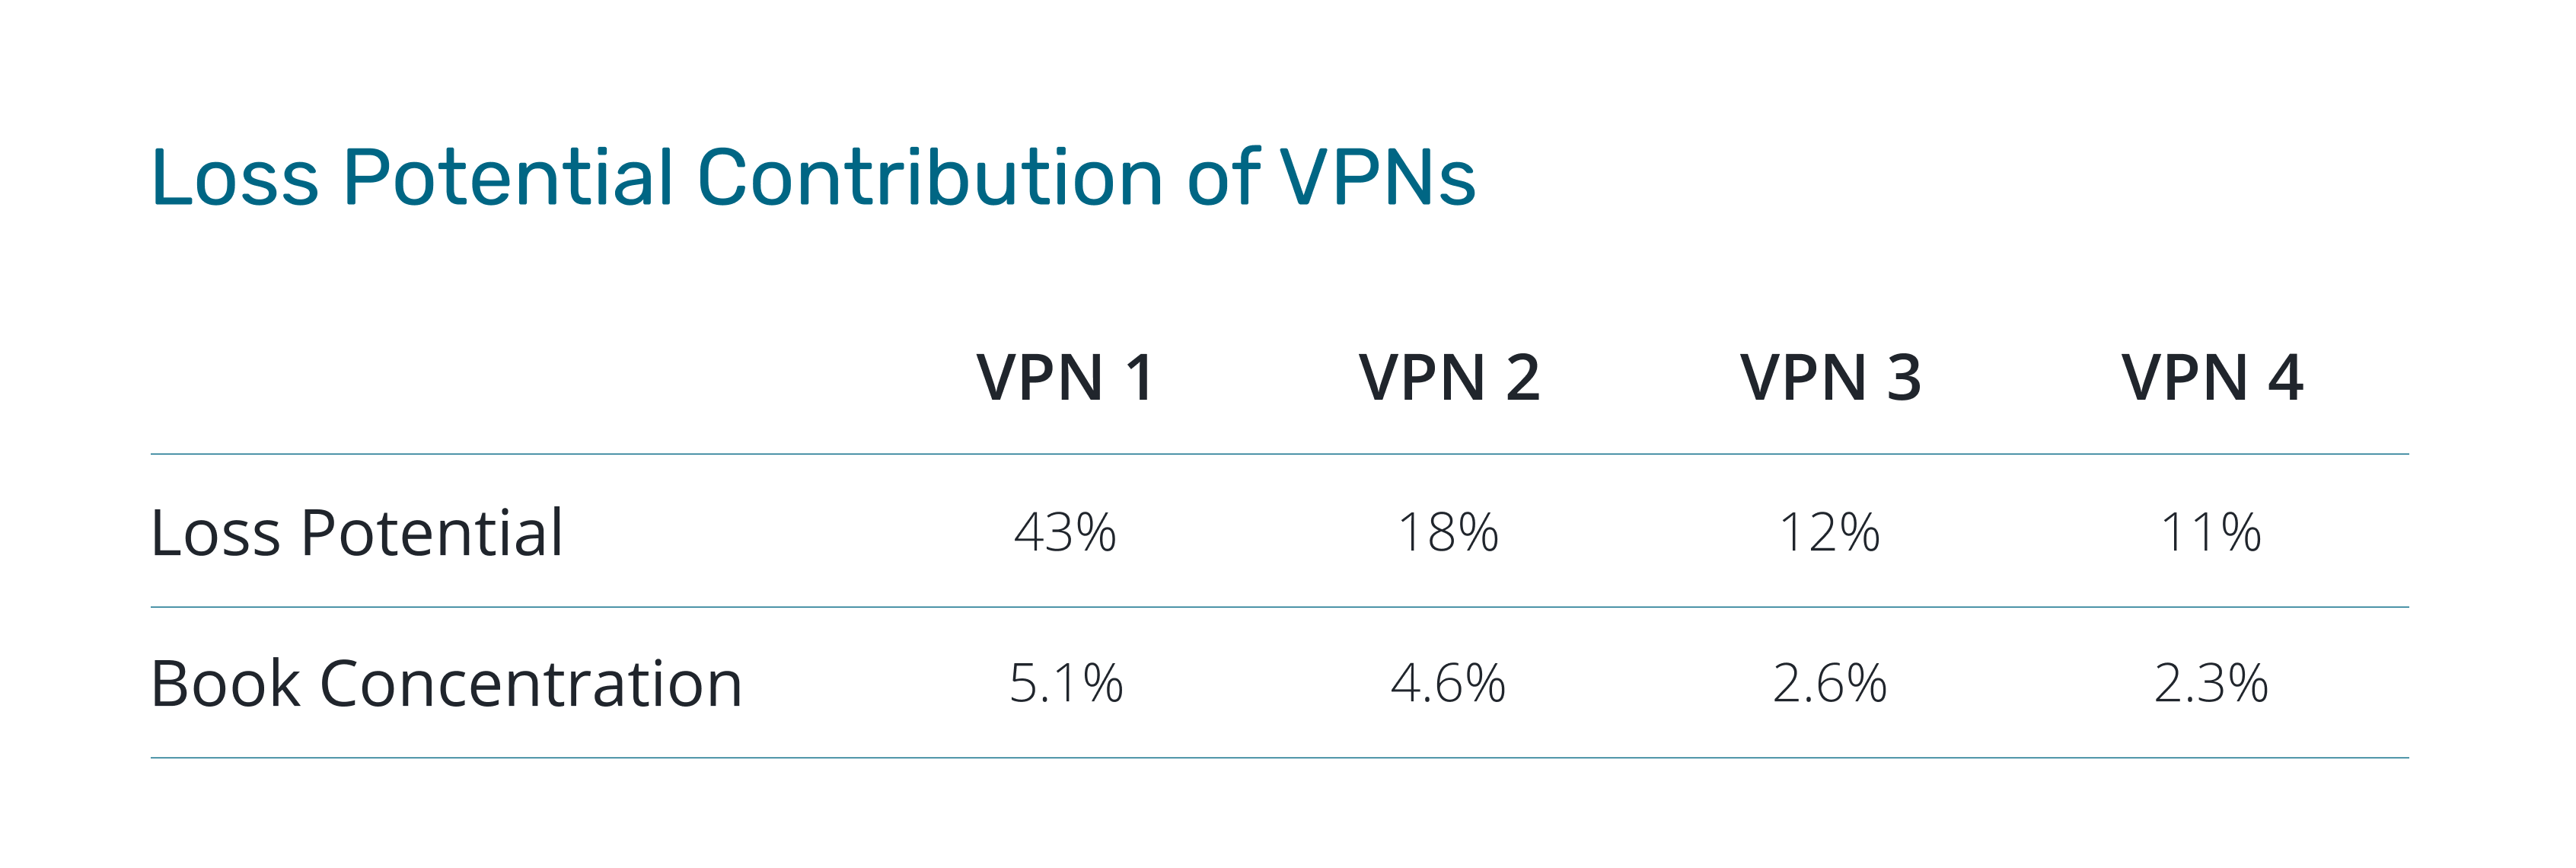 [LINE GRAPH] Loss Potential Contribution of VPNs